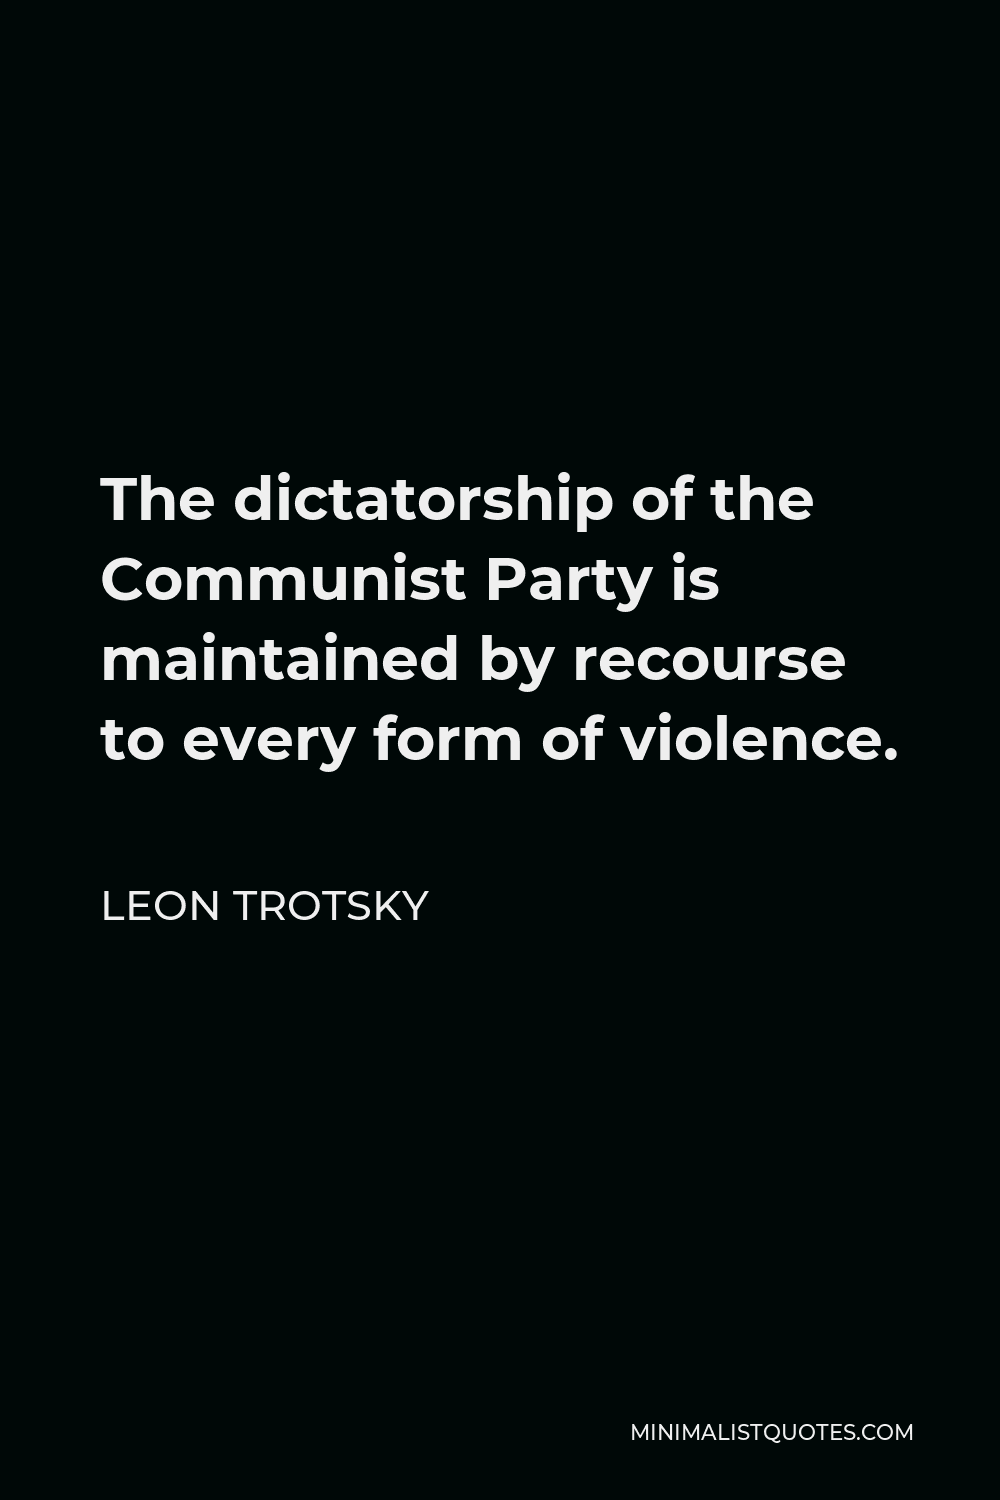 Leon Trotsky Quote - The dictatorship of the Communist Party is maintained by recourse to every form of violence.